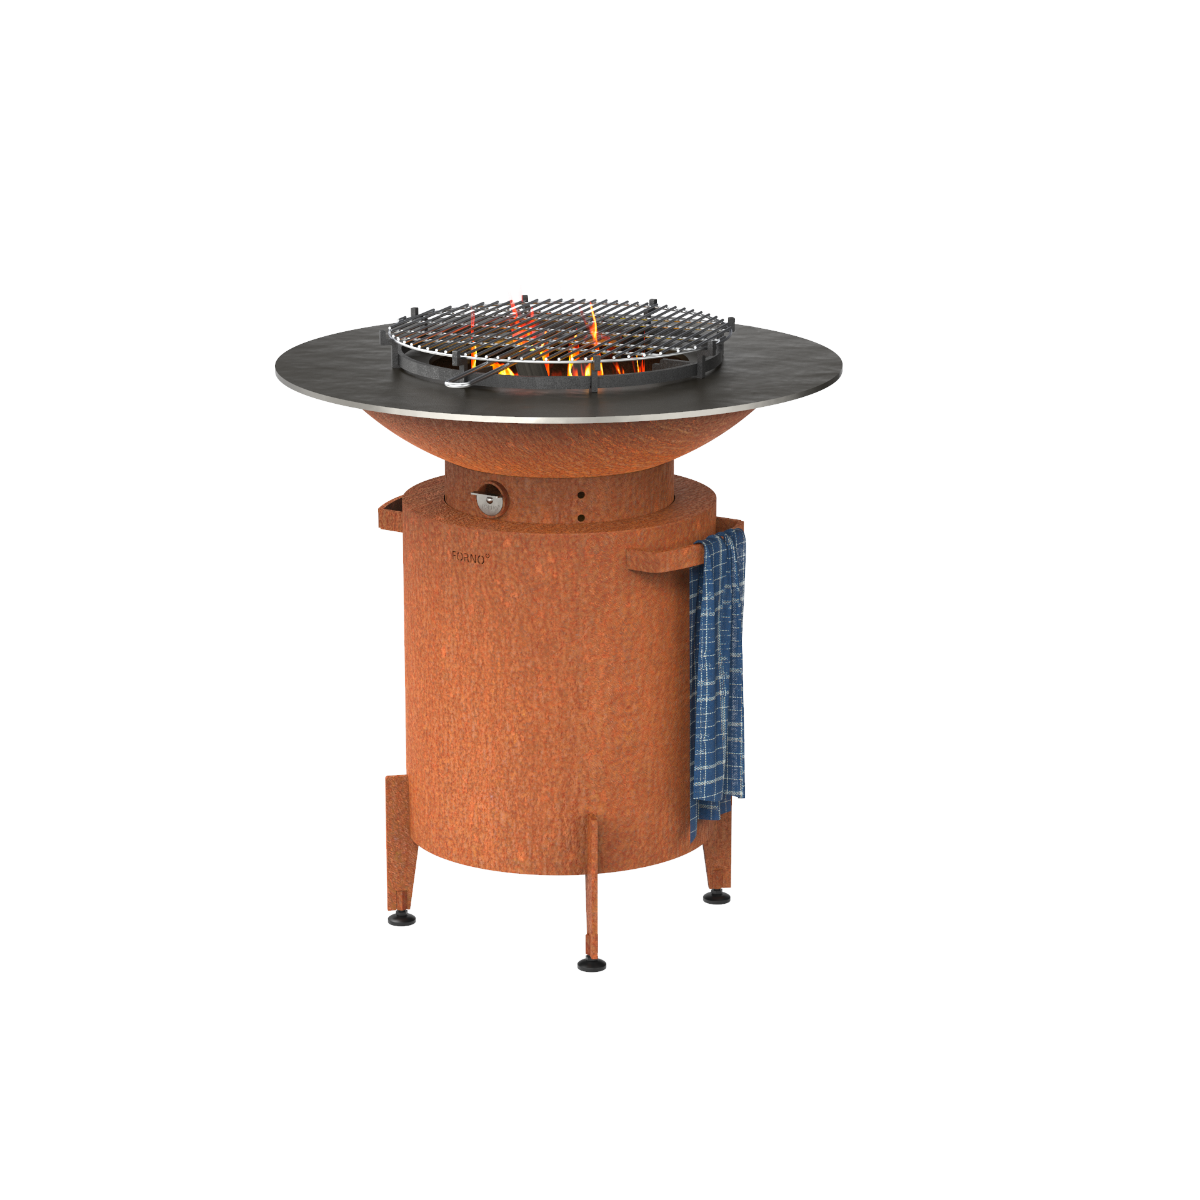 Circular-Grill-and-Base-Forno-Parker-and-Coop-BFC